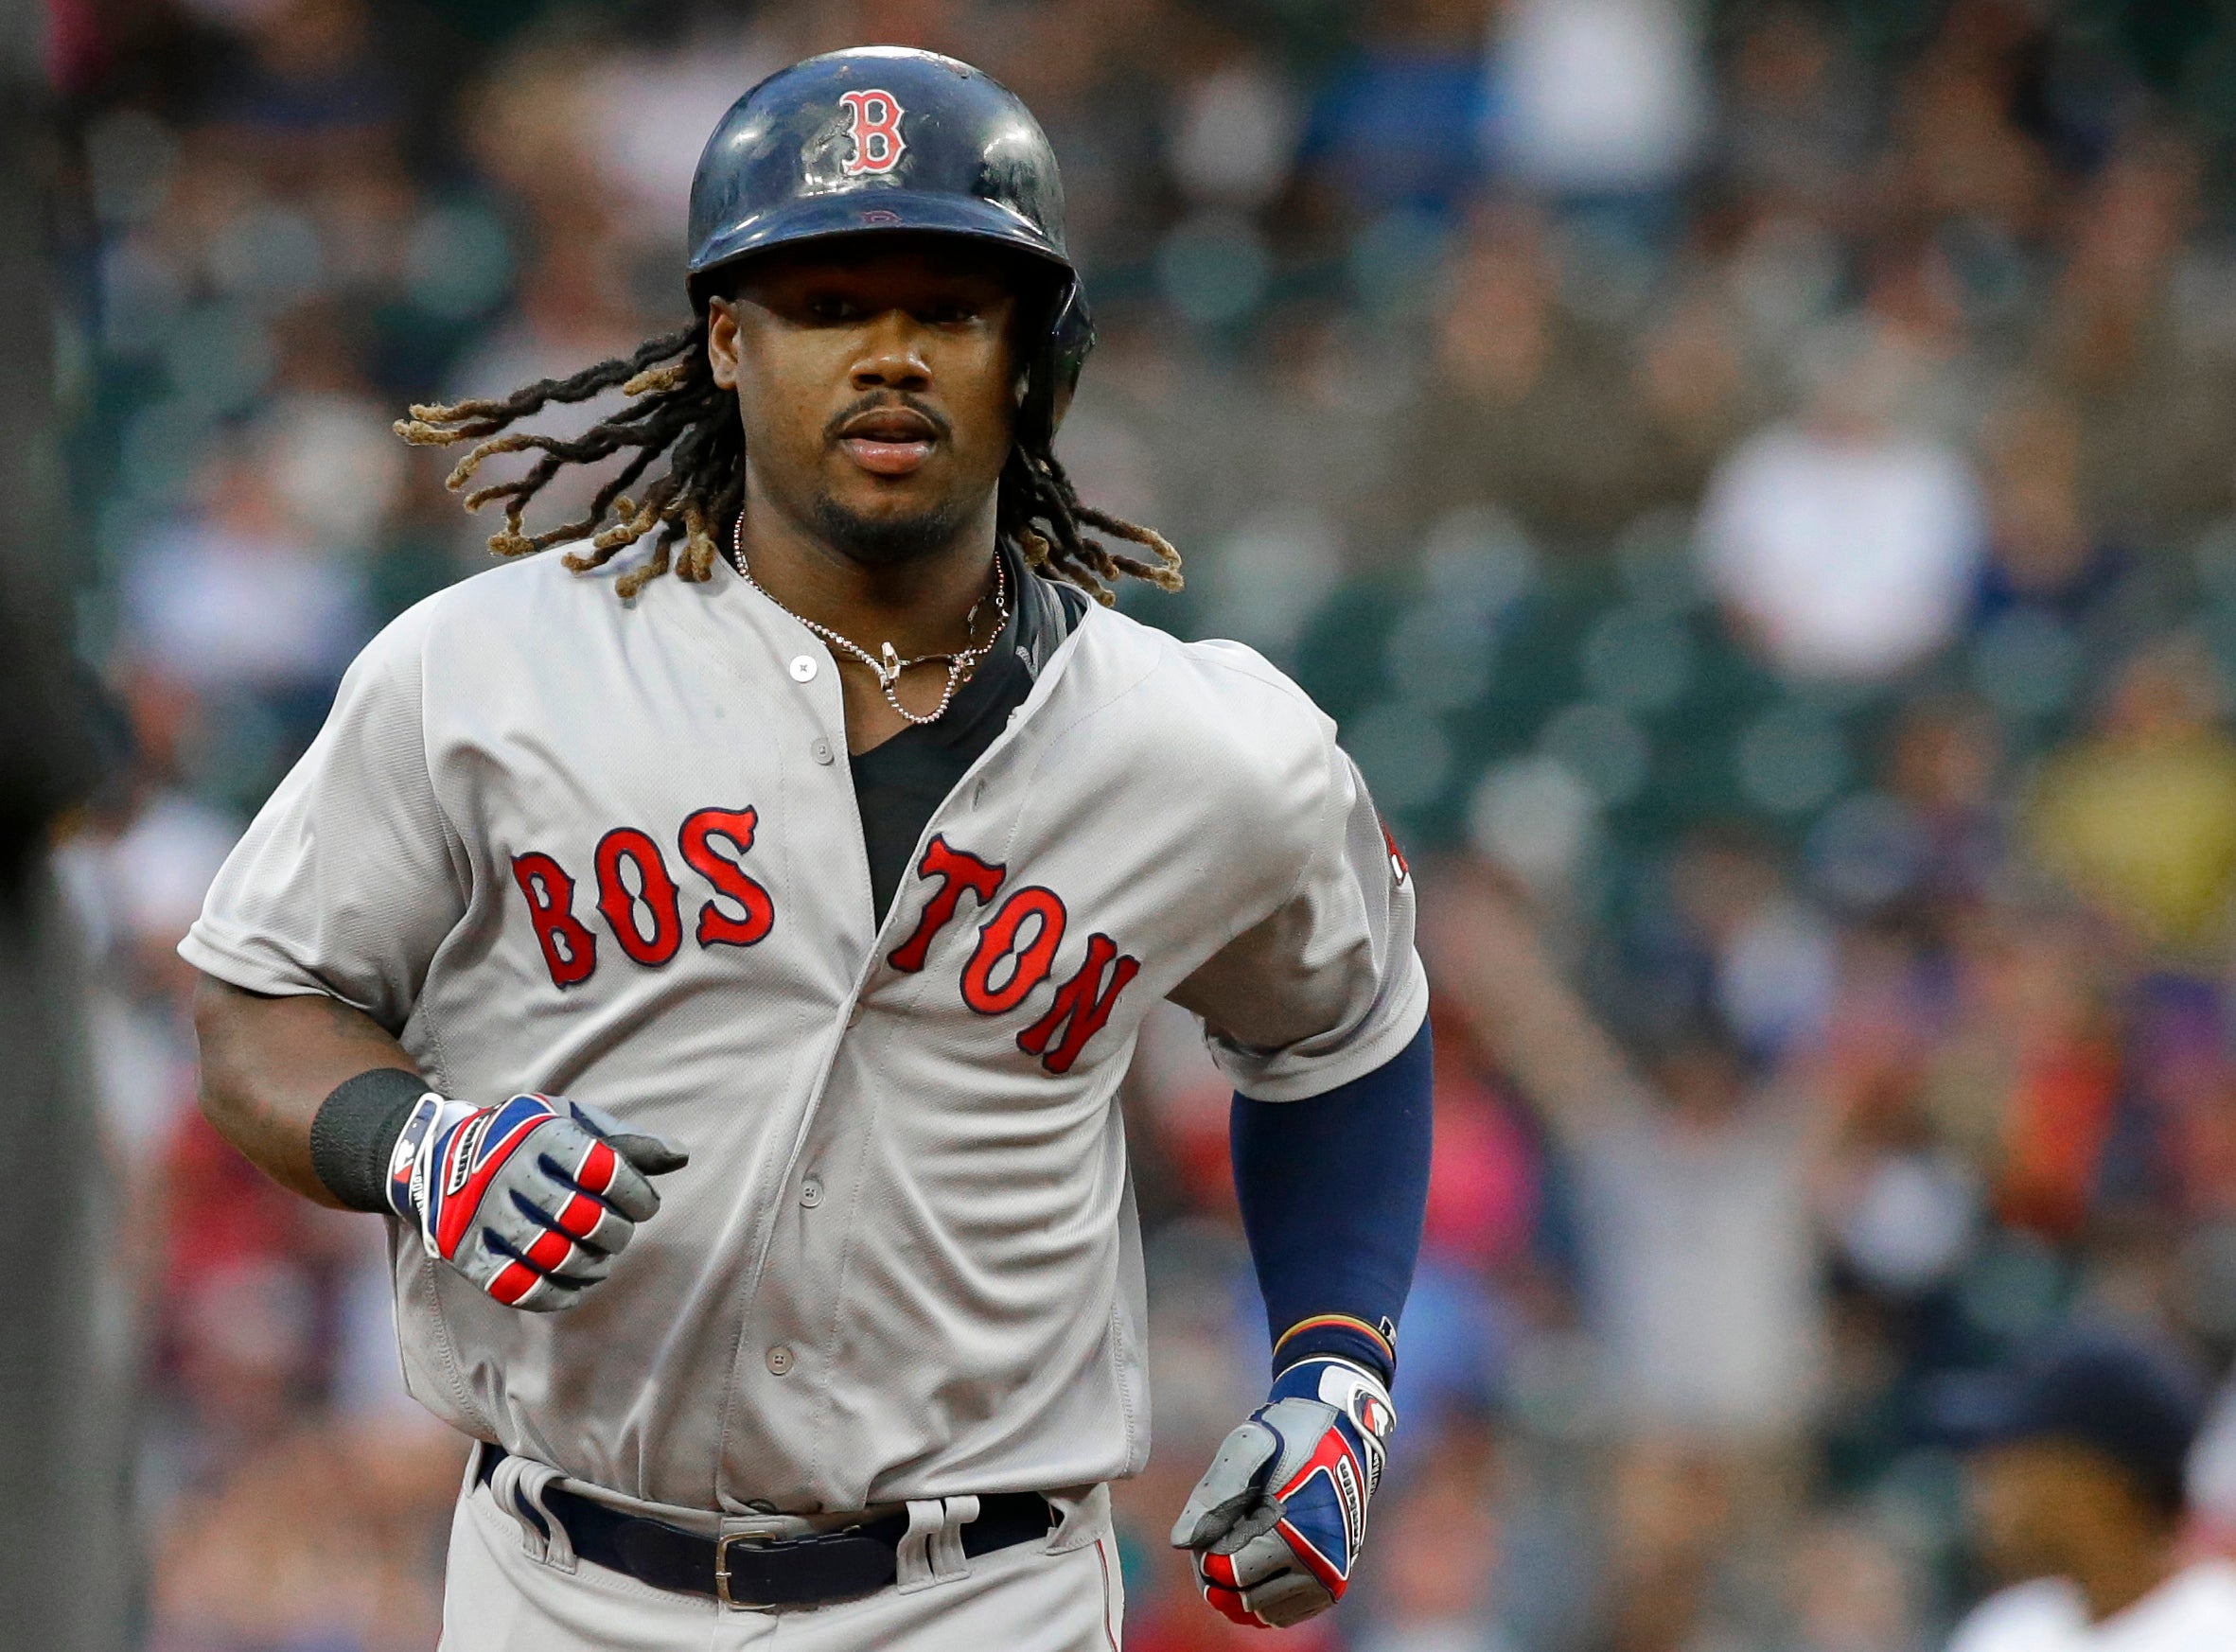 Hanley Ramirez, Boston Red Sox DH/1B: 'Literally I was hitting with one arm  last year' because of shoulder issue 